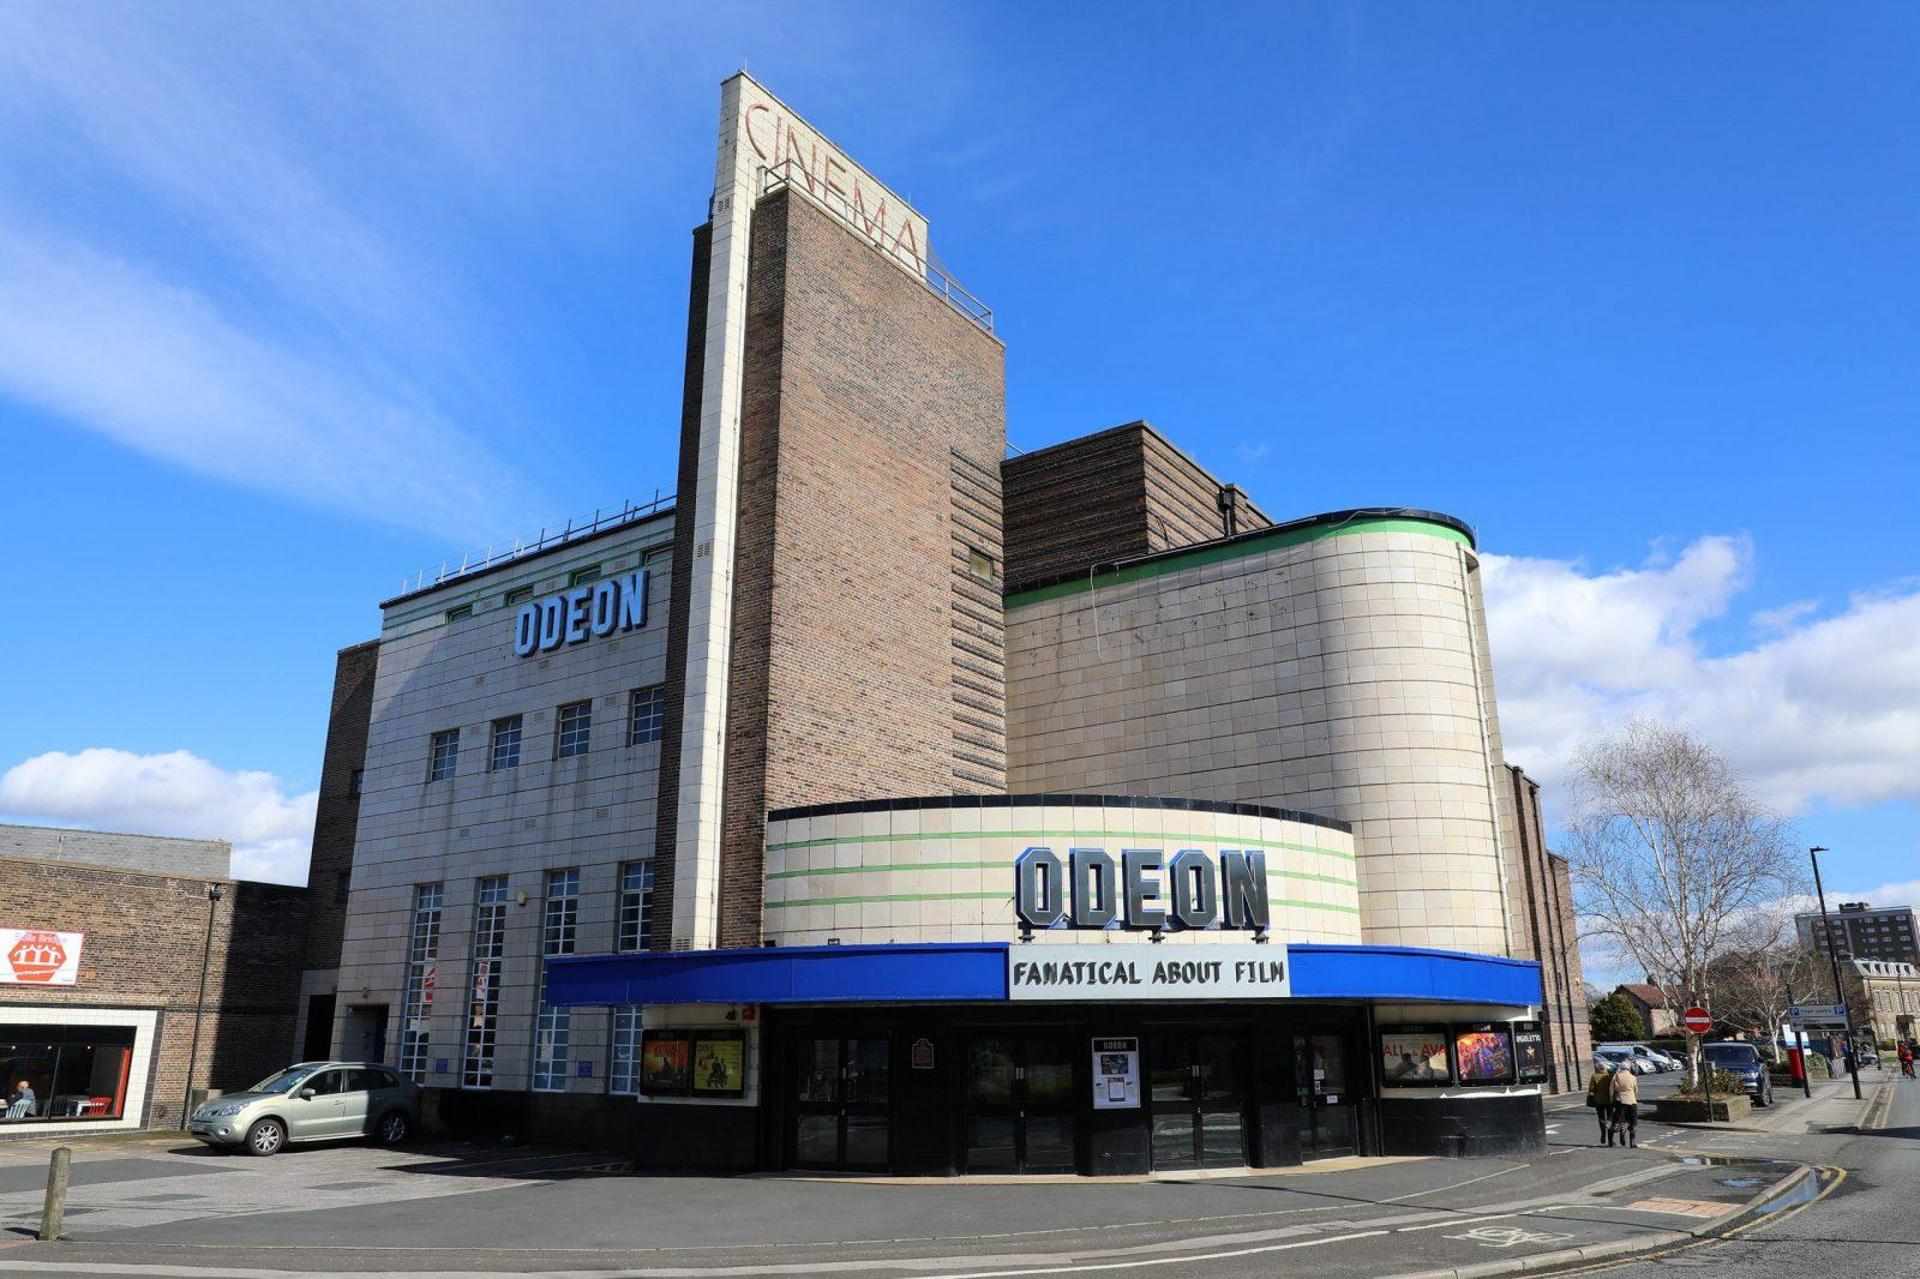 Harrogate Odeon cinema goes up for sale for &pound;7m+